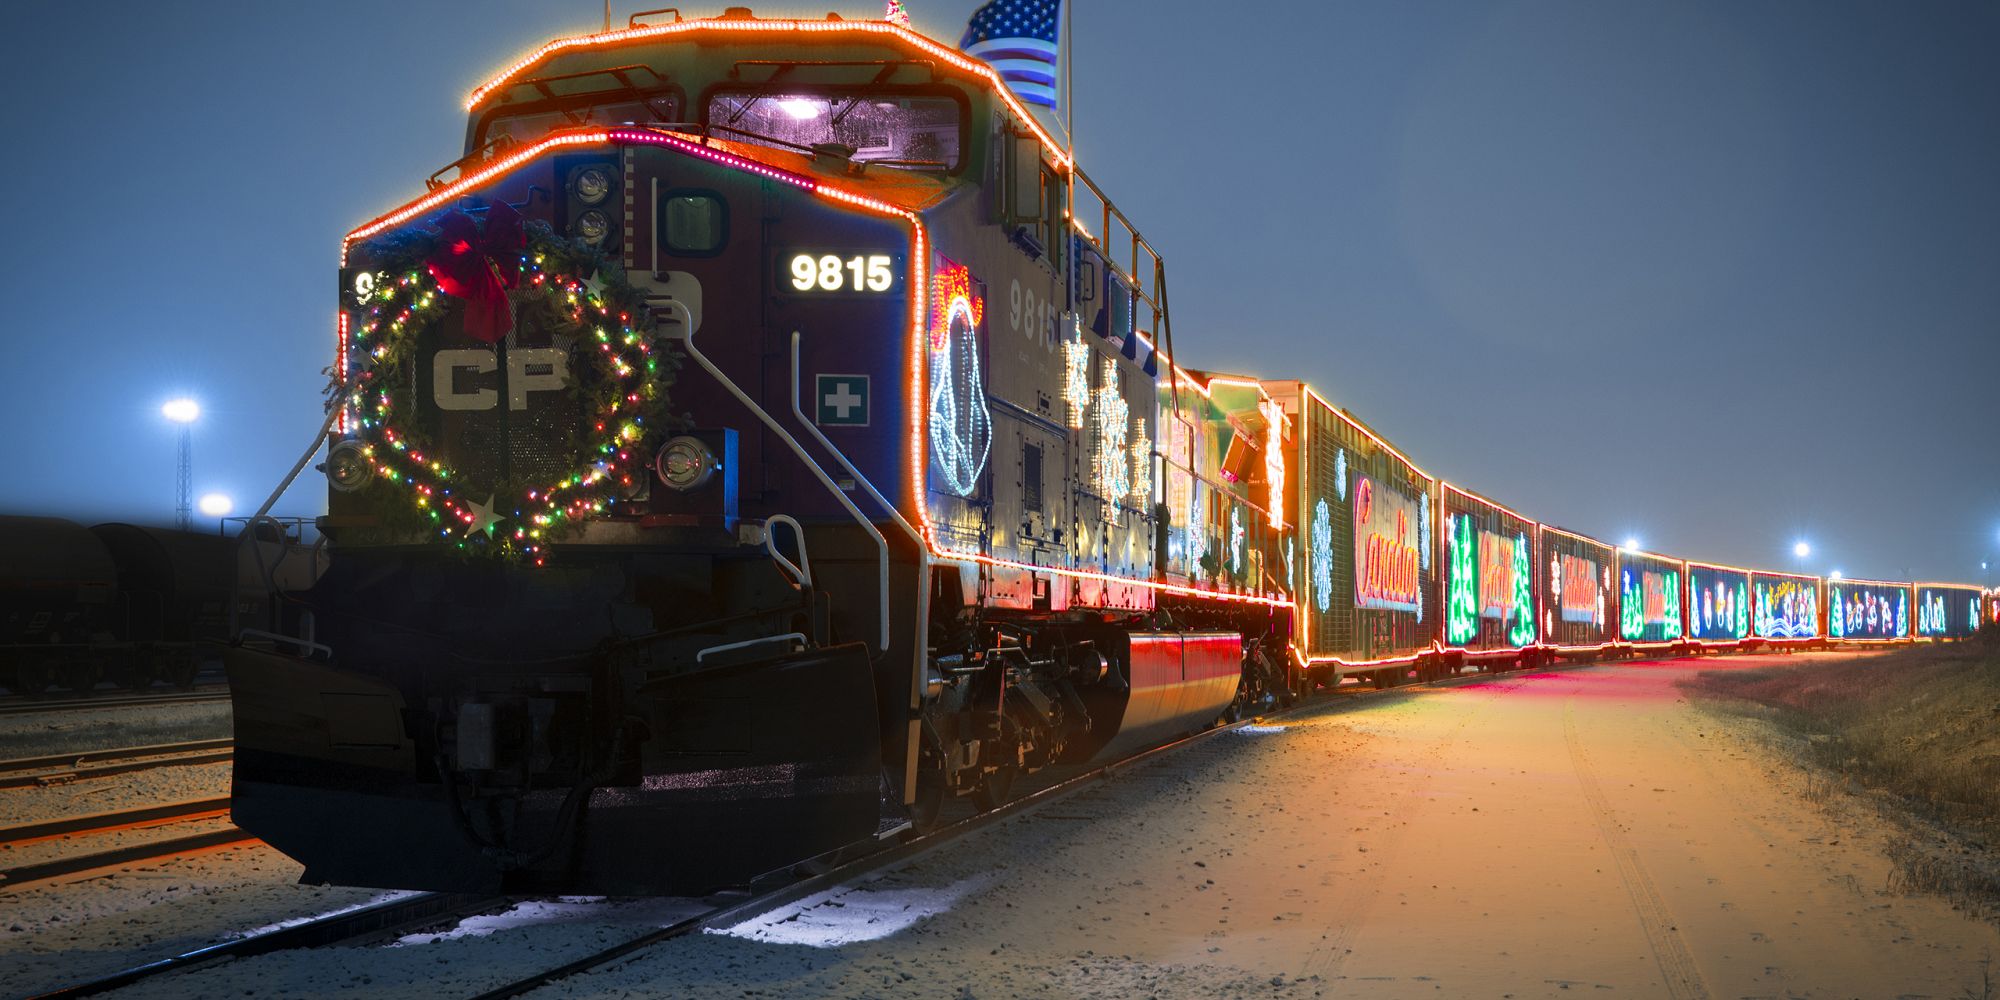 The 21st Annual CP Holiday Train is coming through the Revelstoke and Shuswap area